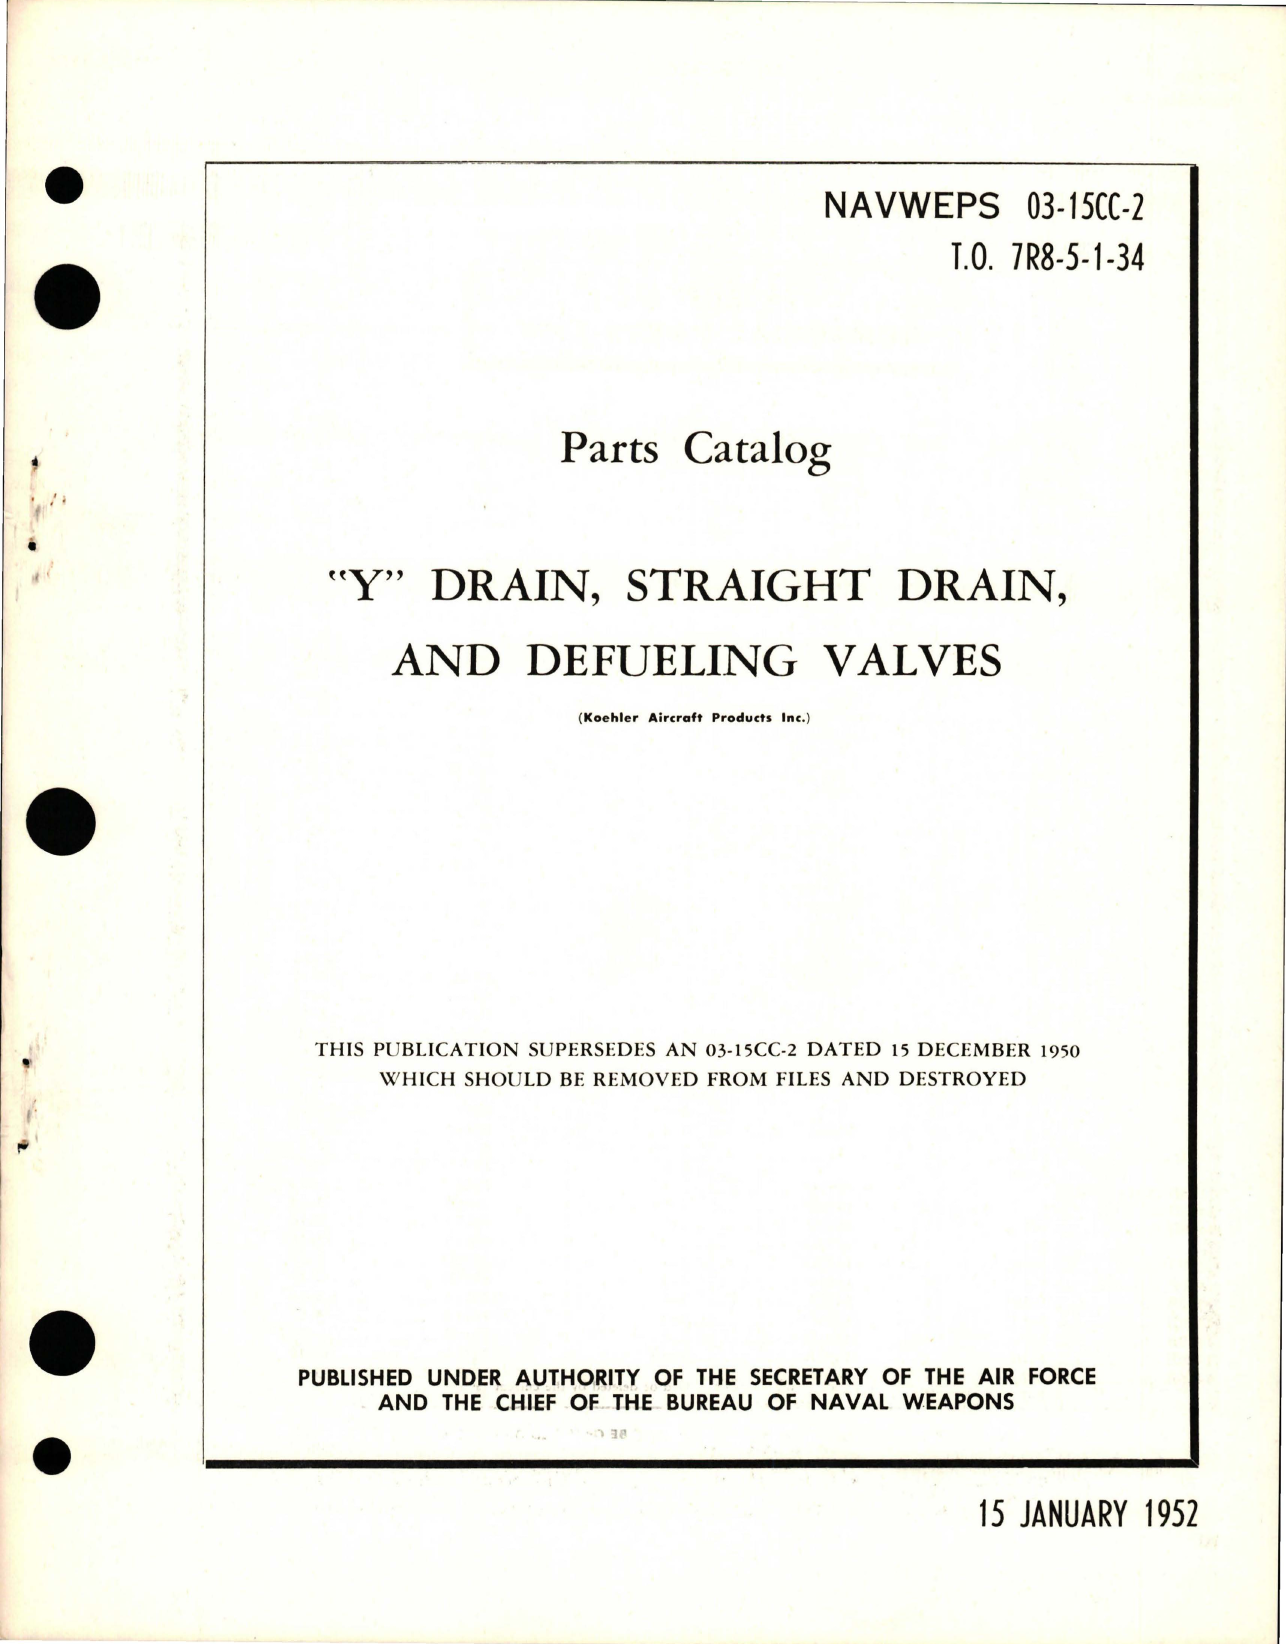 Sample page 1 from AirCorps Library document: Parts Catalog for Straight Drain and Defueling Valves - Y Drain